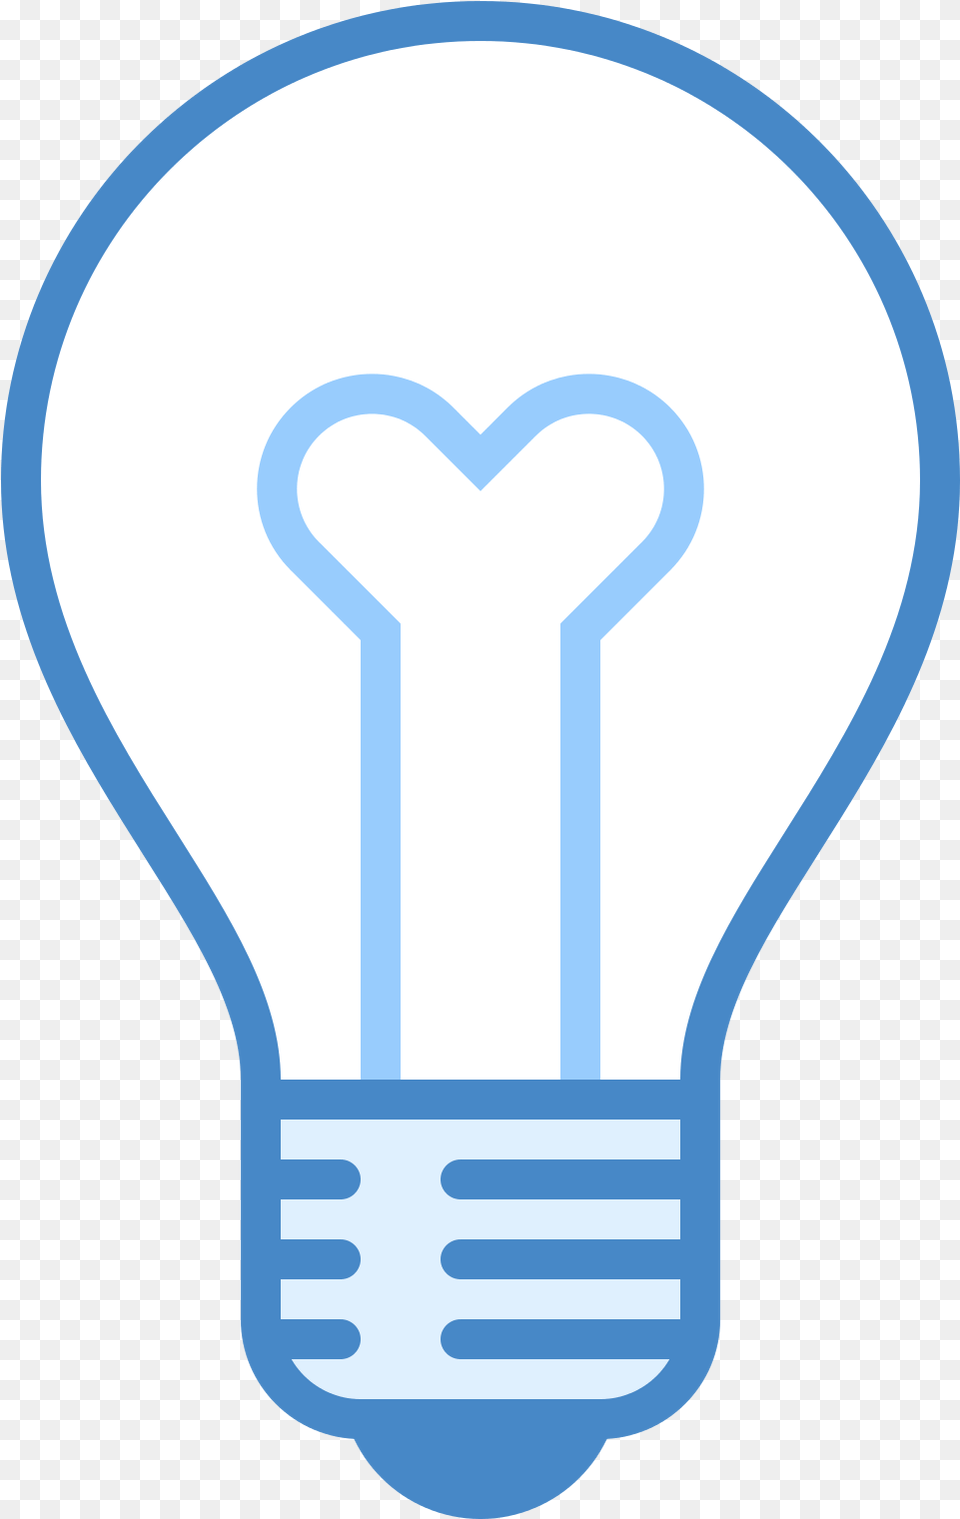 Light Off Icon At Icons8 Sign, Lightbulb, Smoke Pipe Free Png Download